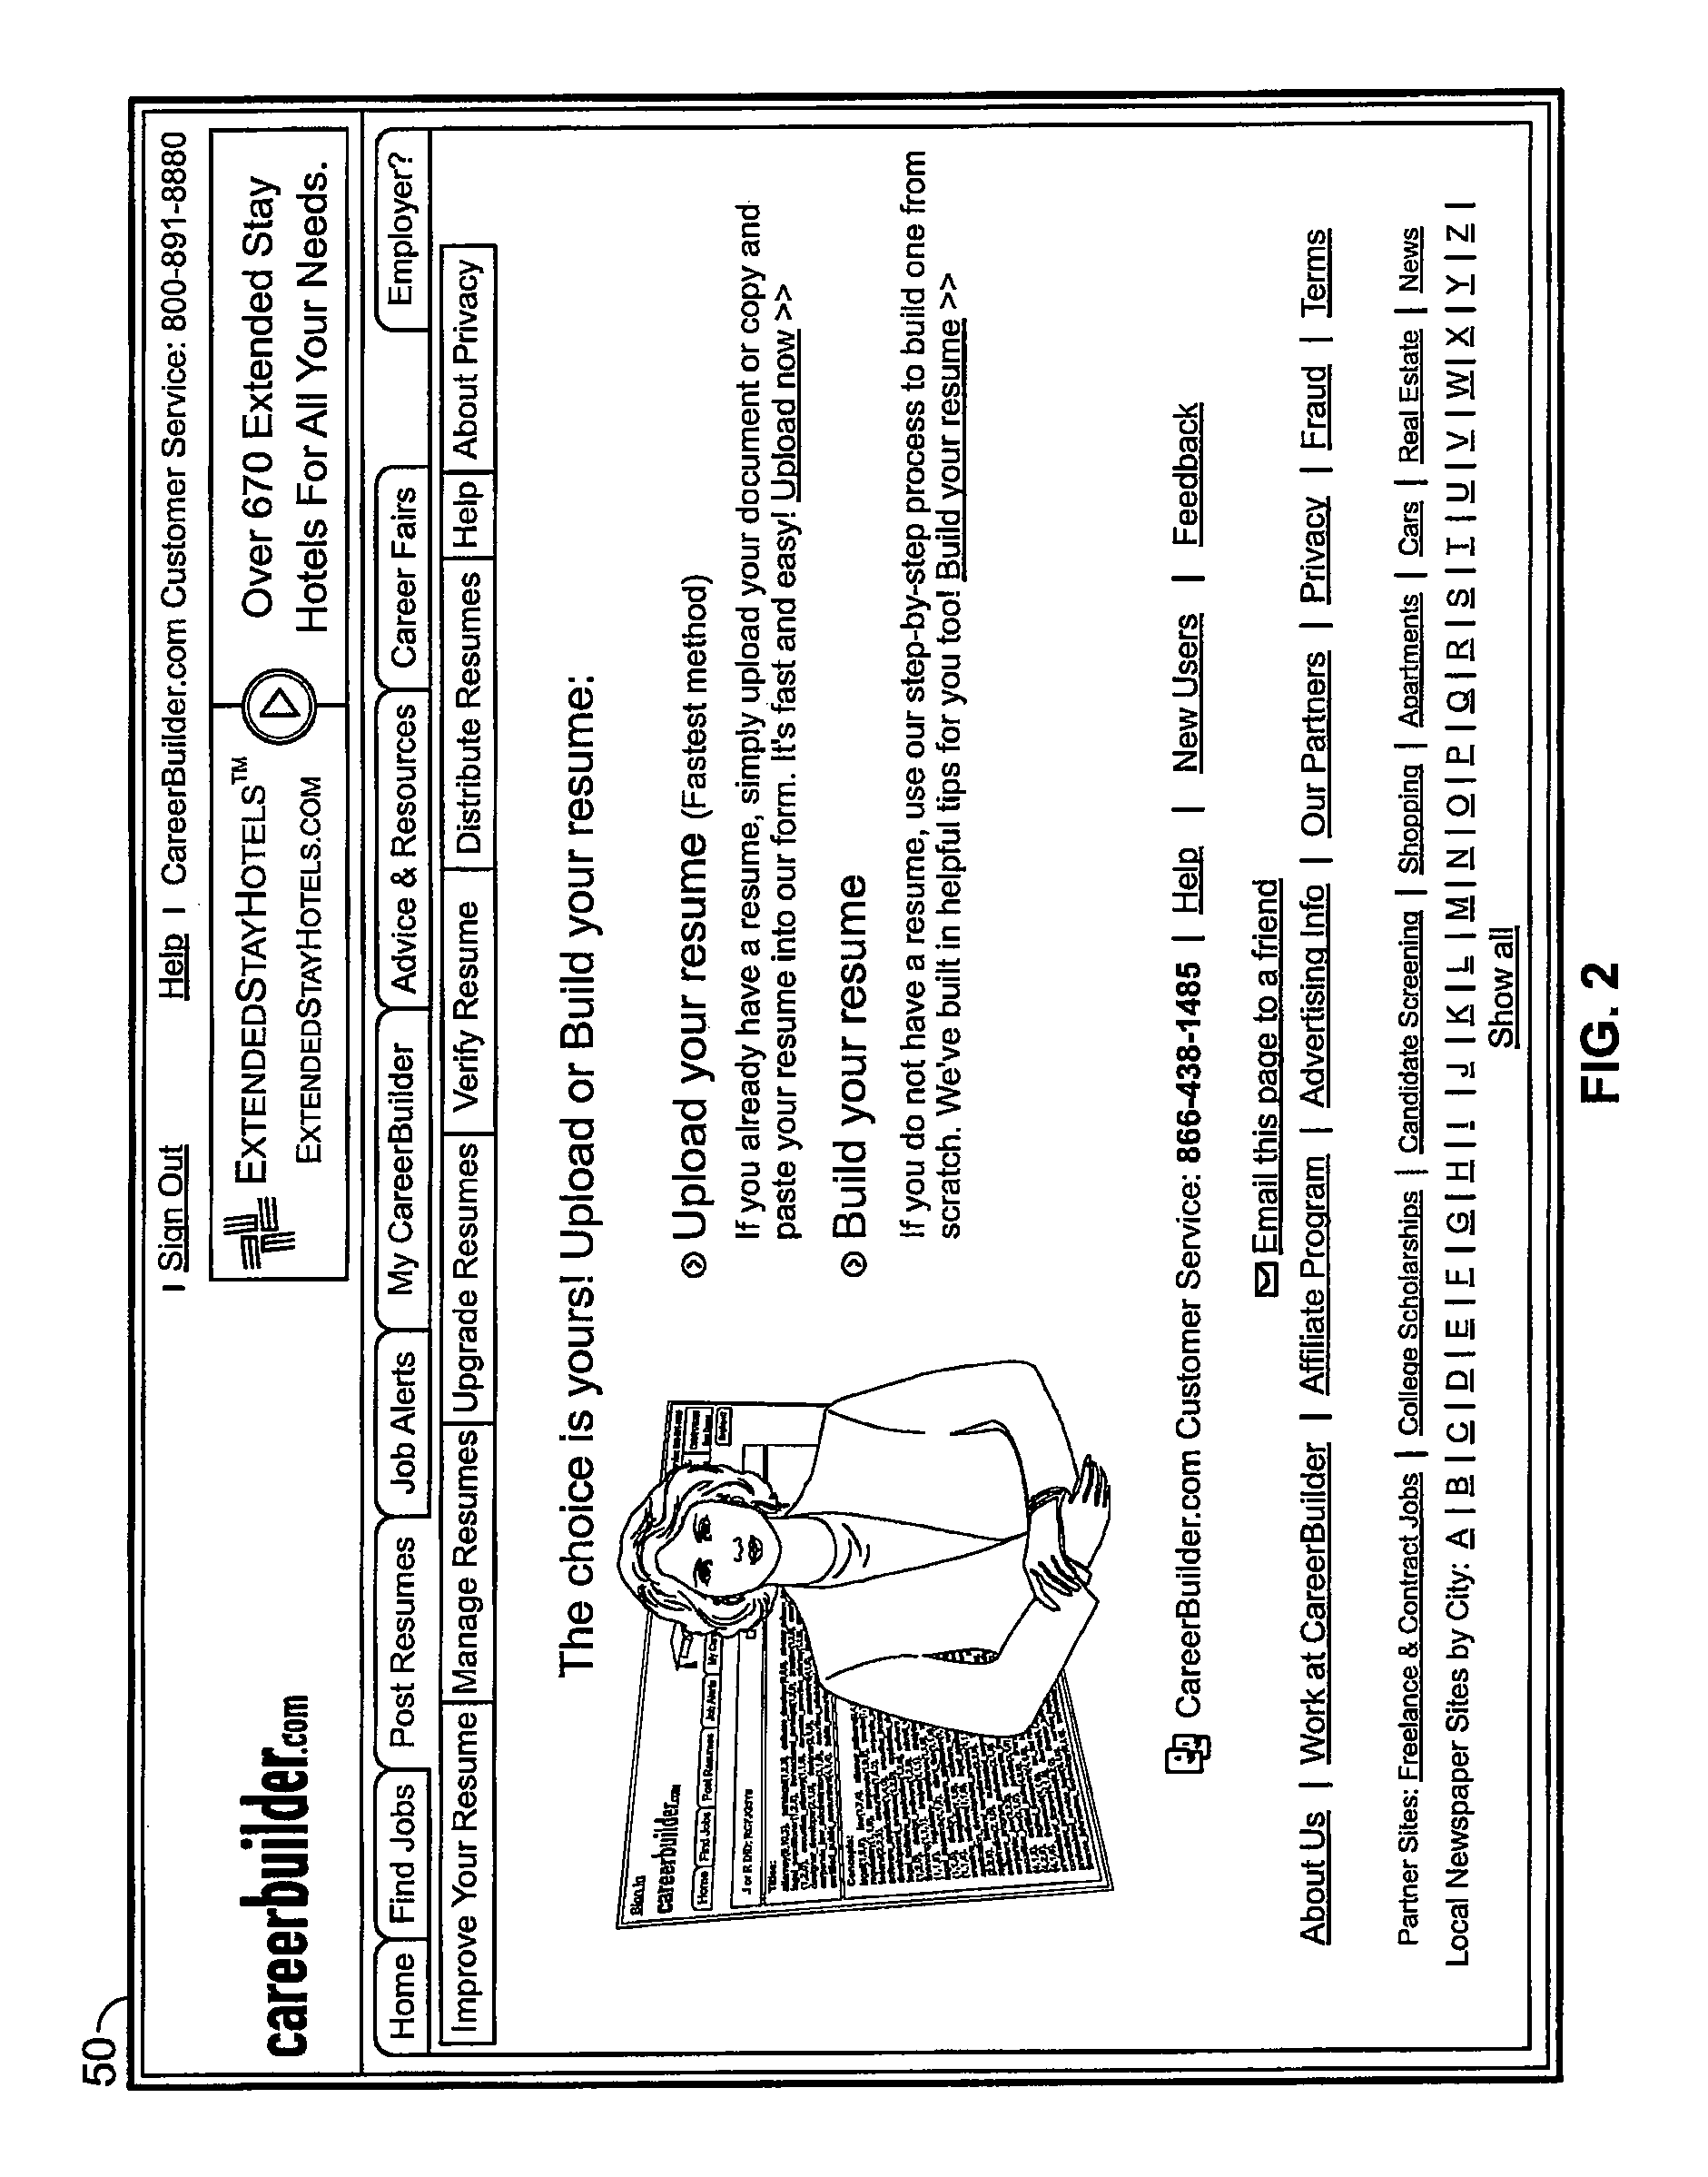 Method and system for matching data sets of non-standard formats